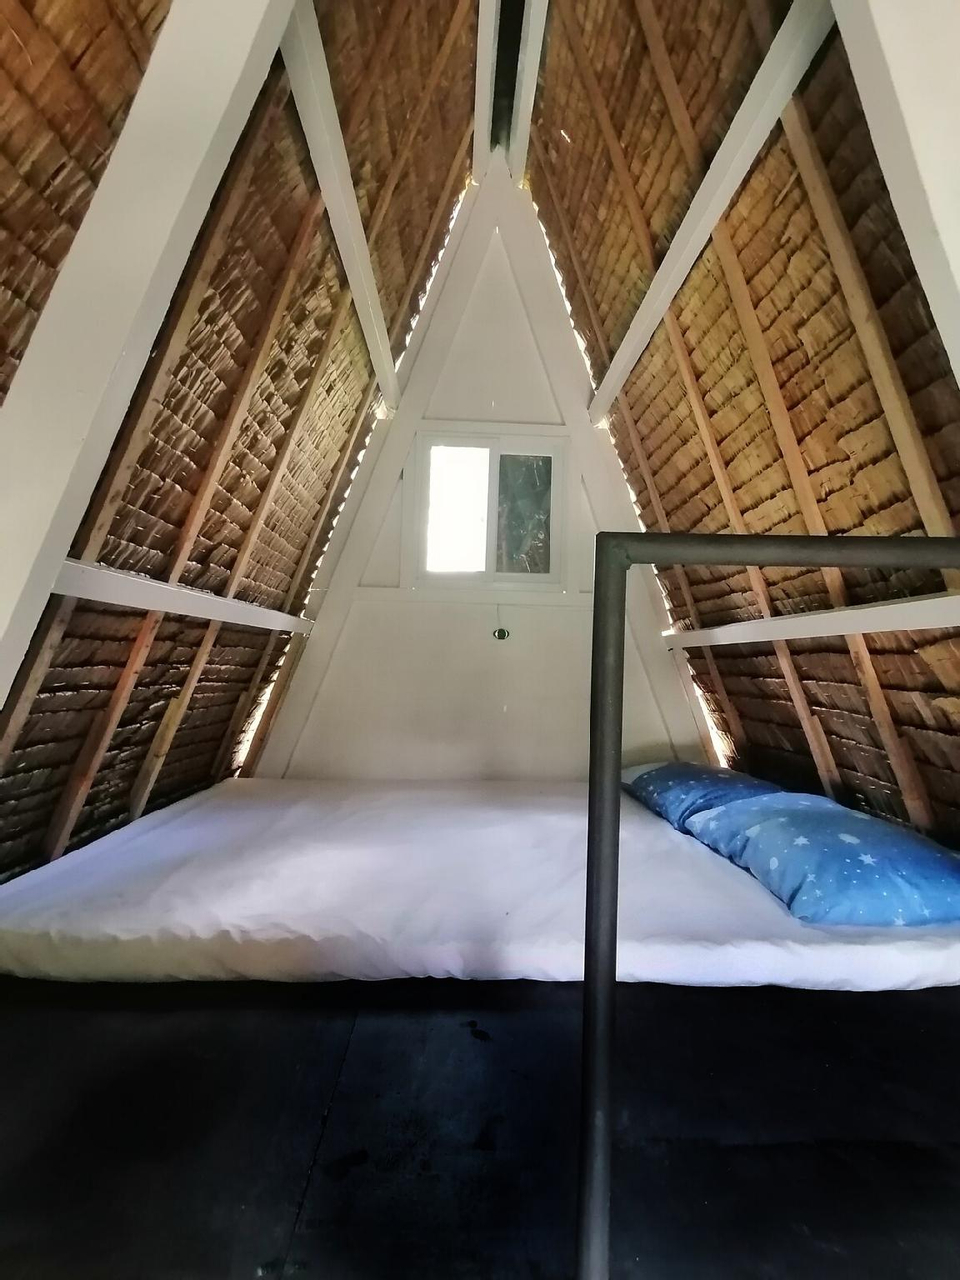 Bedroom 2, A Treehouse by Two Rivers in Tanay (55km Mla), Antipolo City